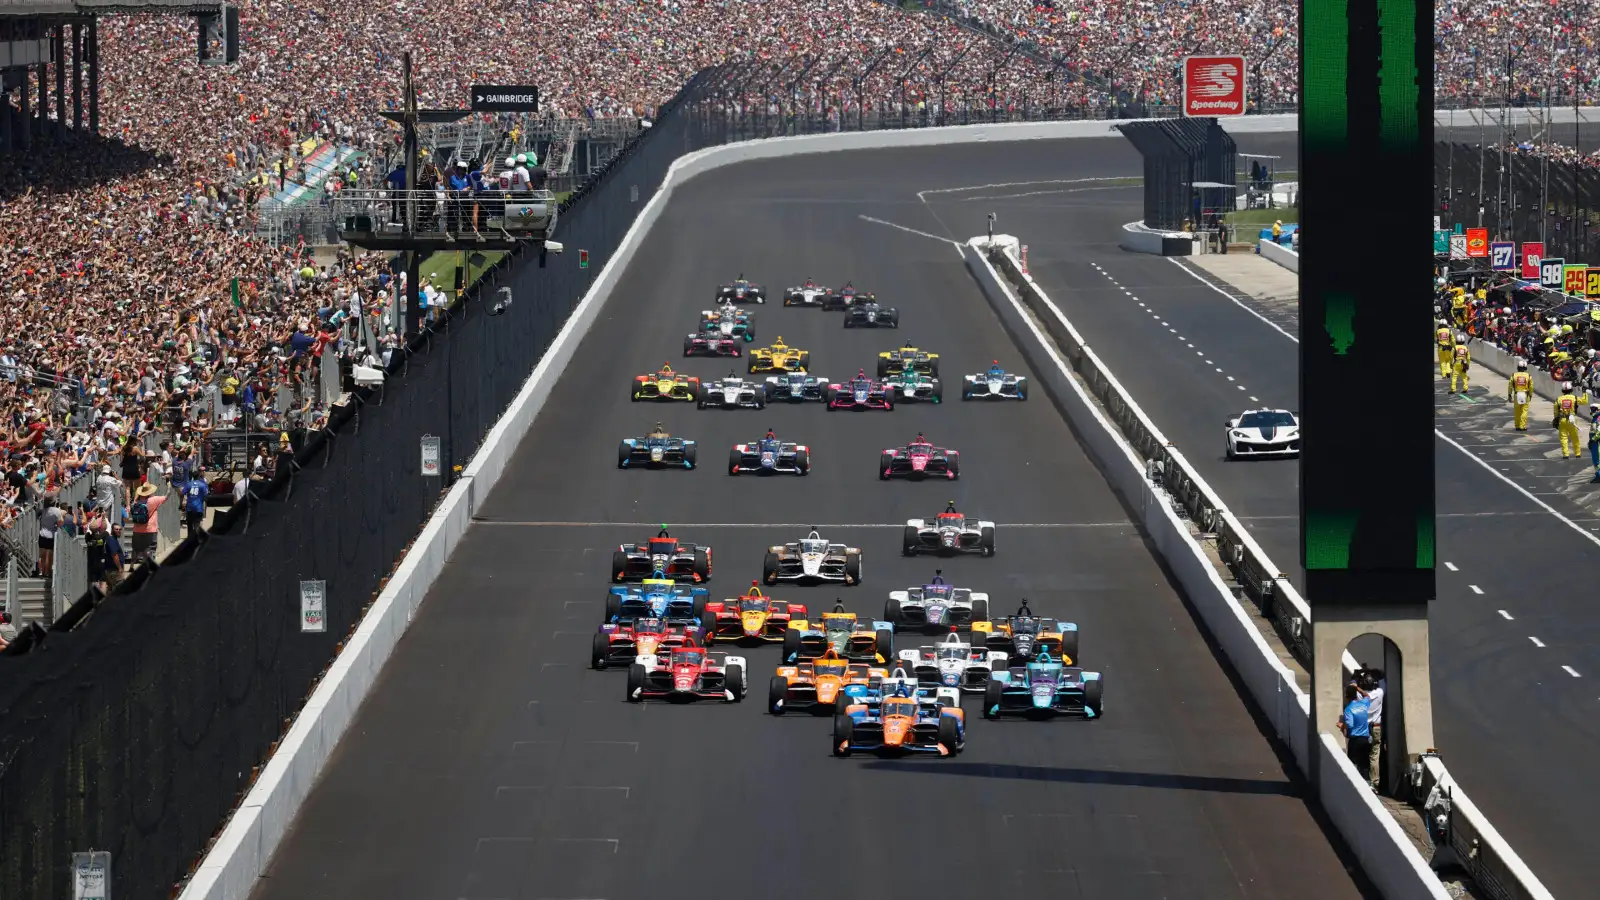 The start of the 2022 Indianapolis 500. Indy 500 Indiana, May 2022.